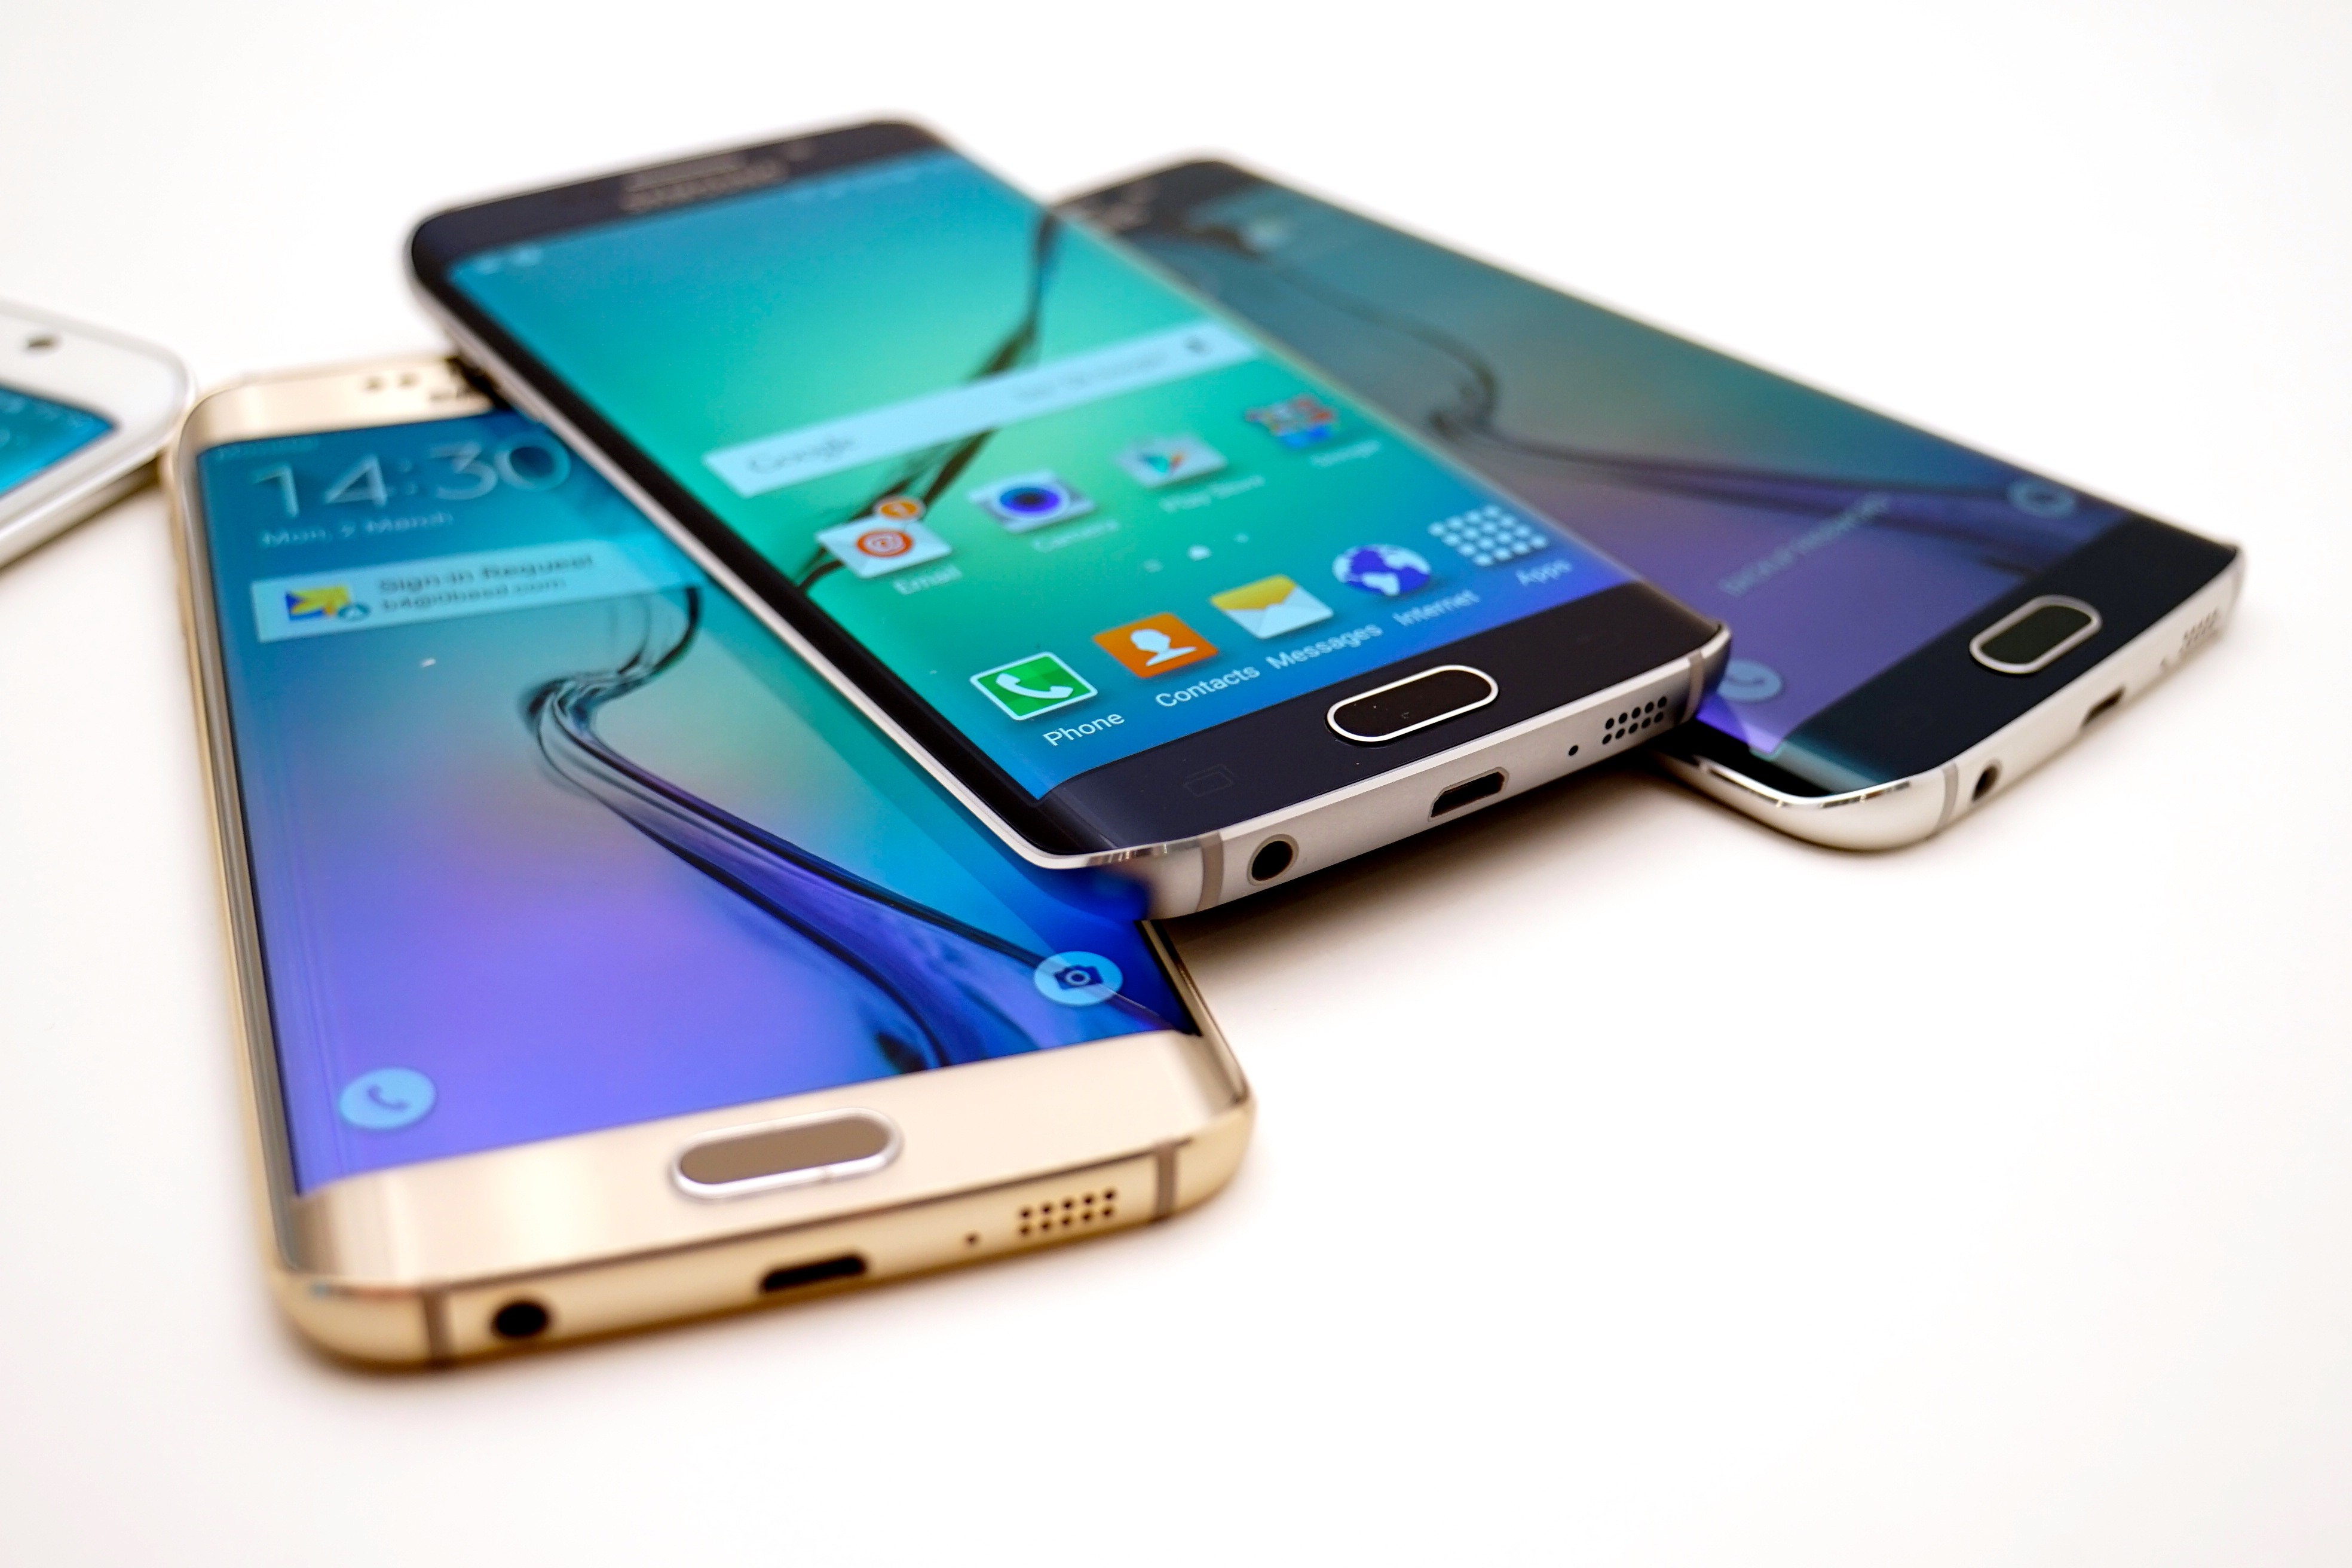  o galaxy s6 (Foto: flickr/ creative commons)